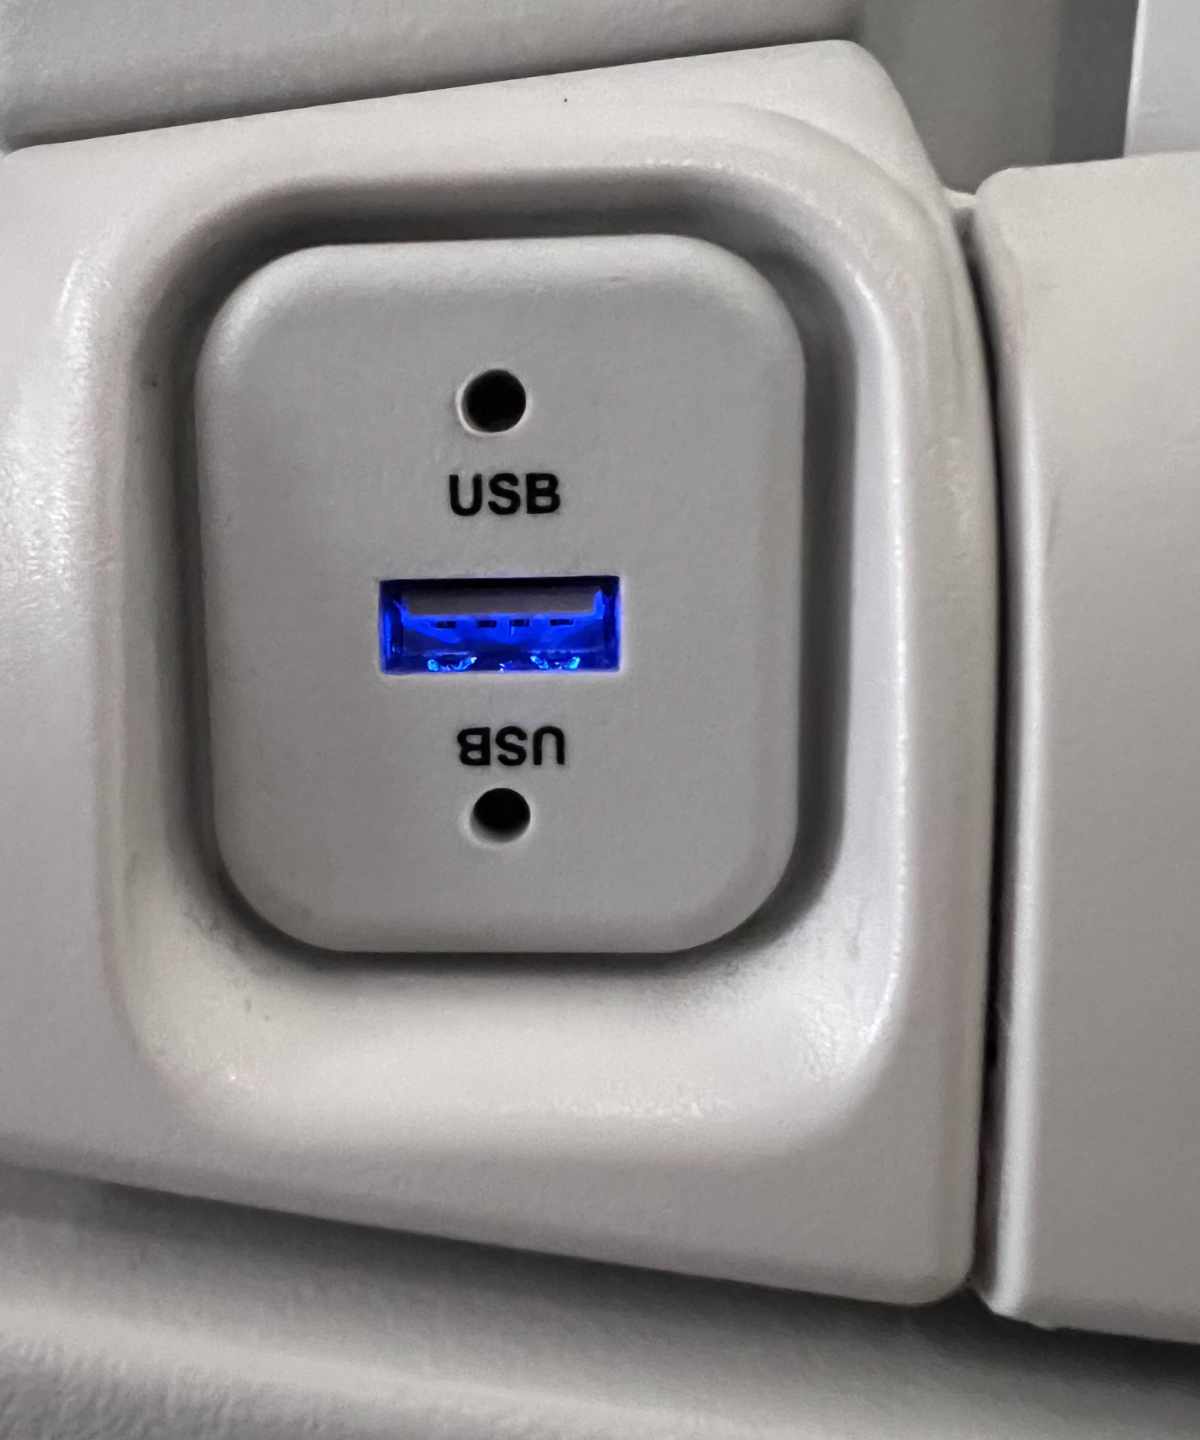 Good to see airplanes include the Australian spelling of USB